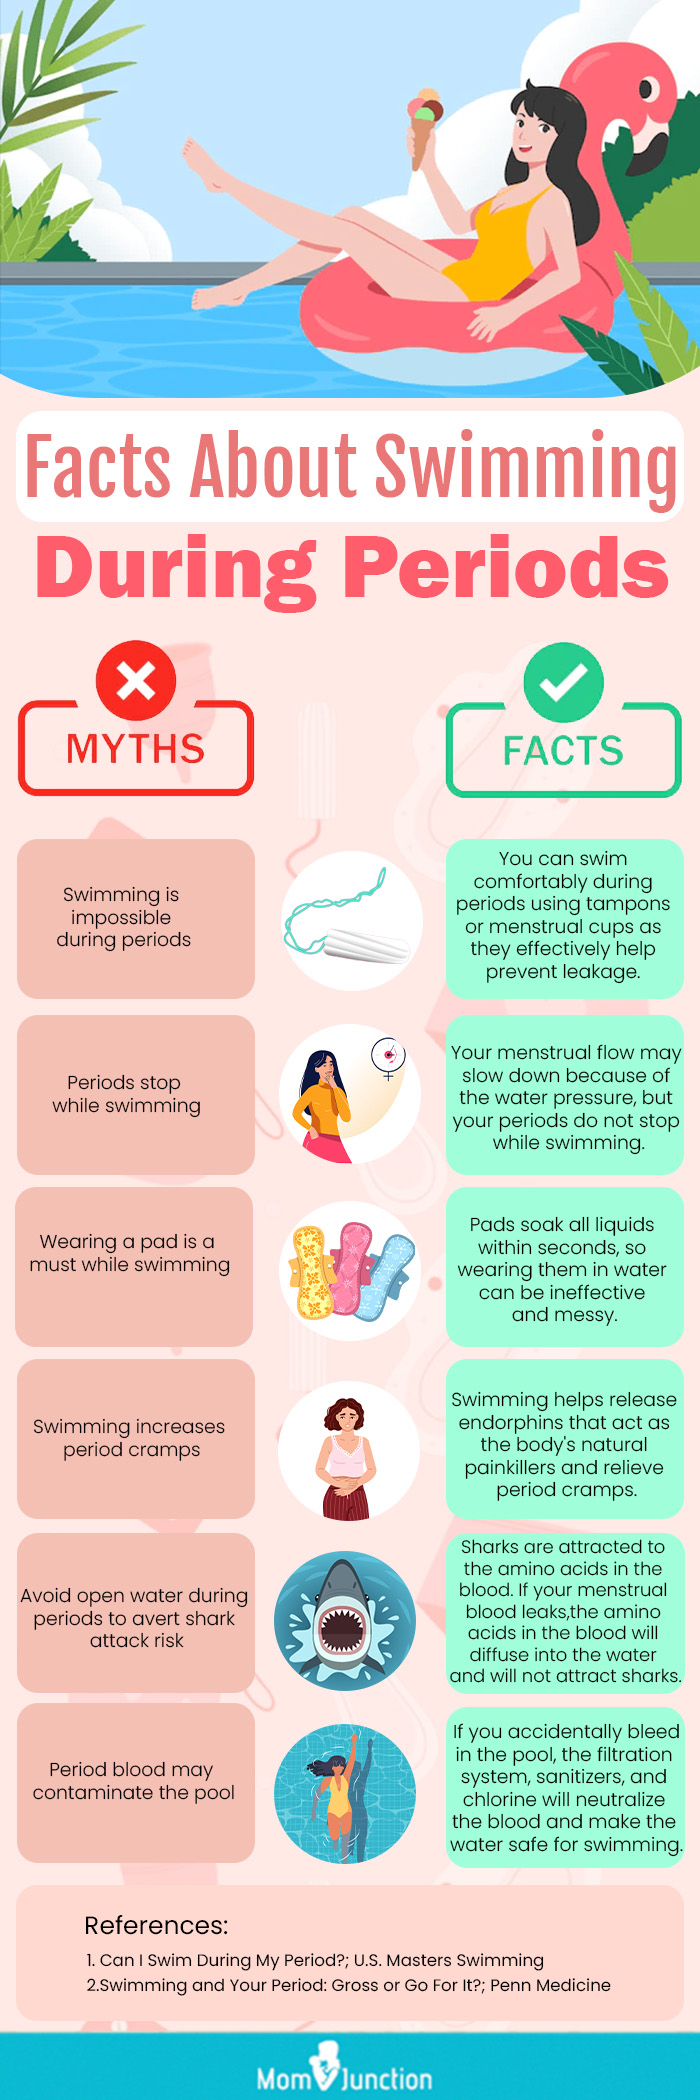 facts about swimming during periods (infographic)